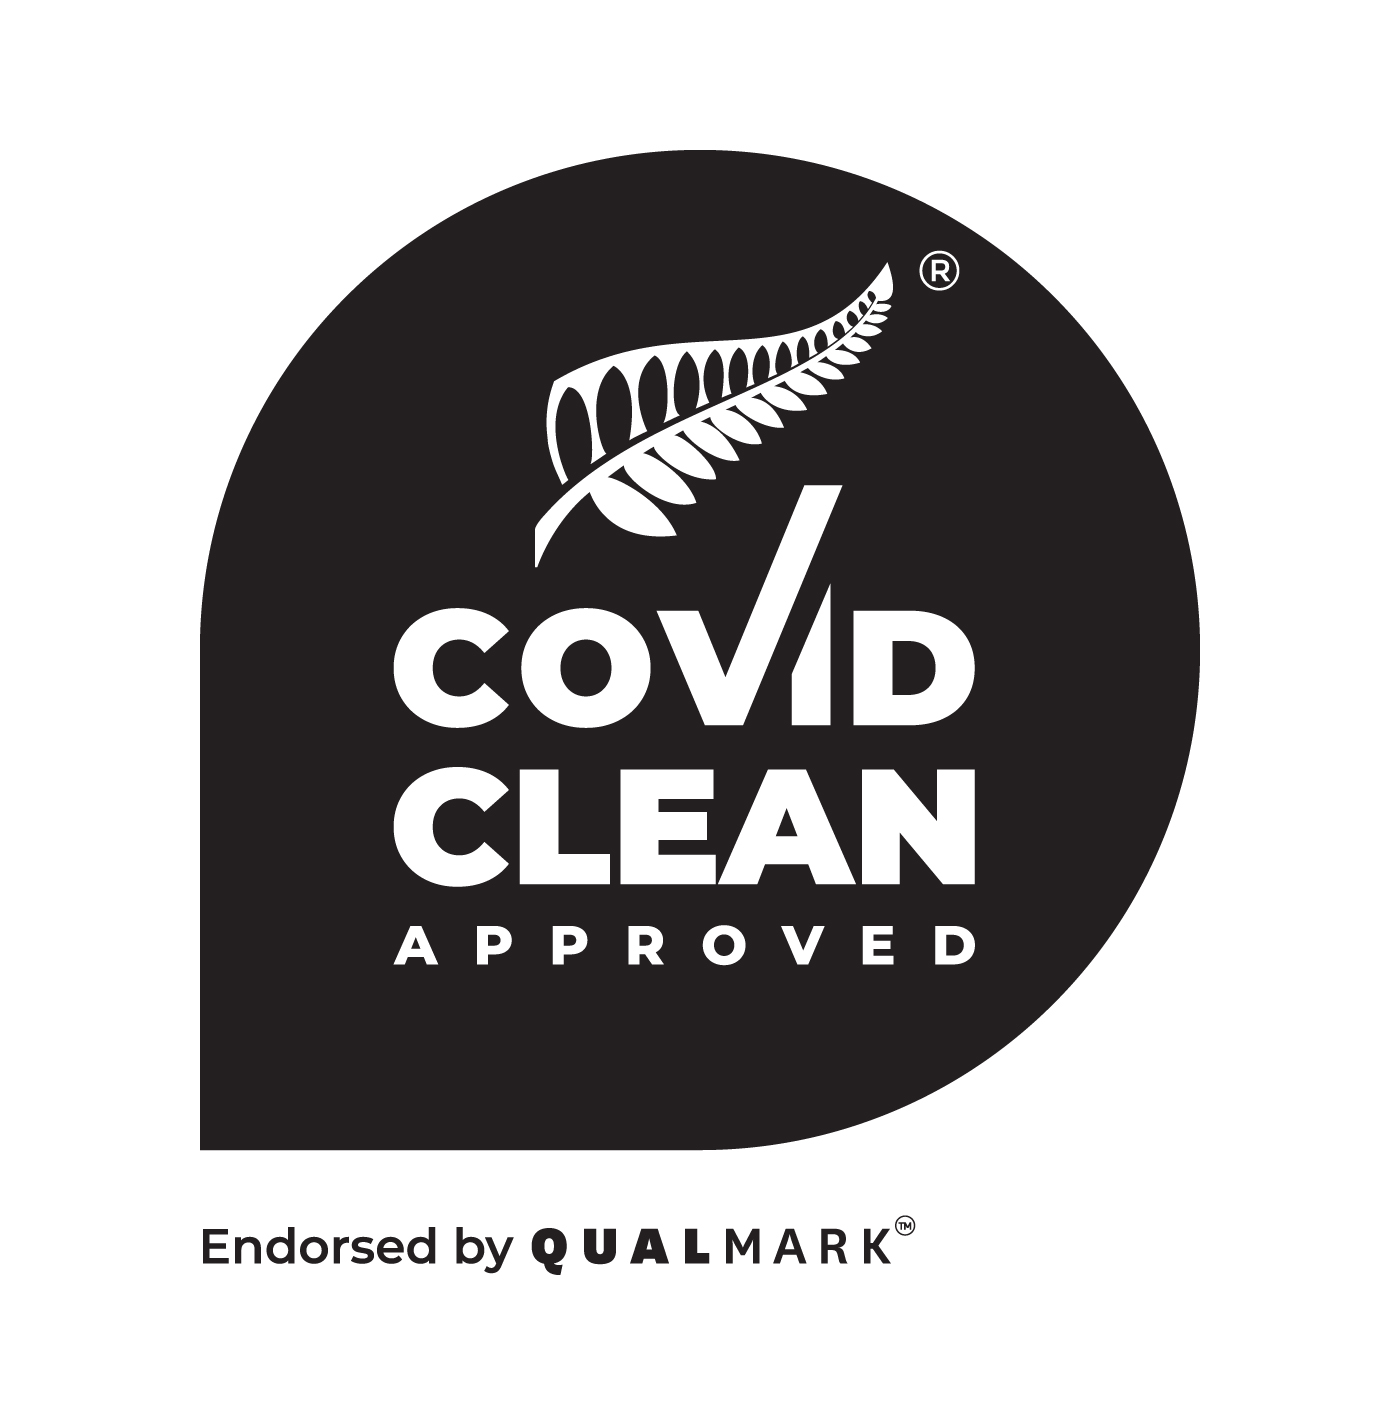 Qualmark - COVID Clean Approved